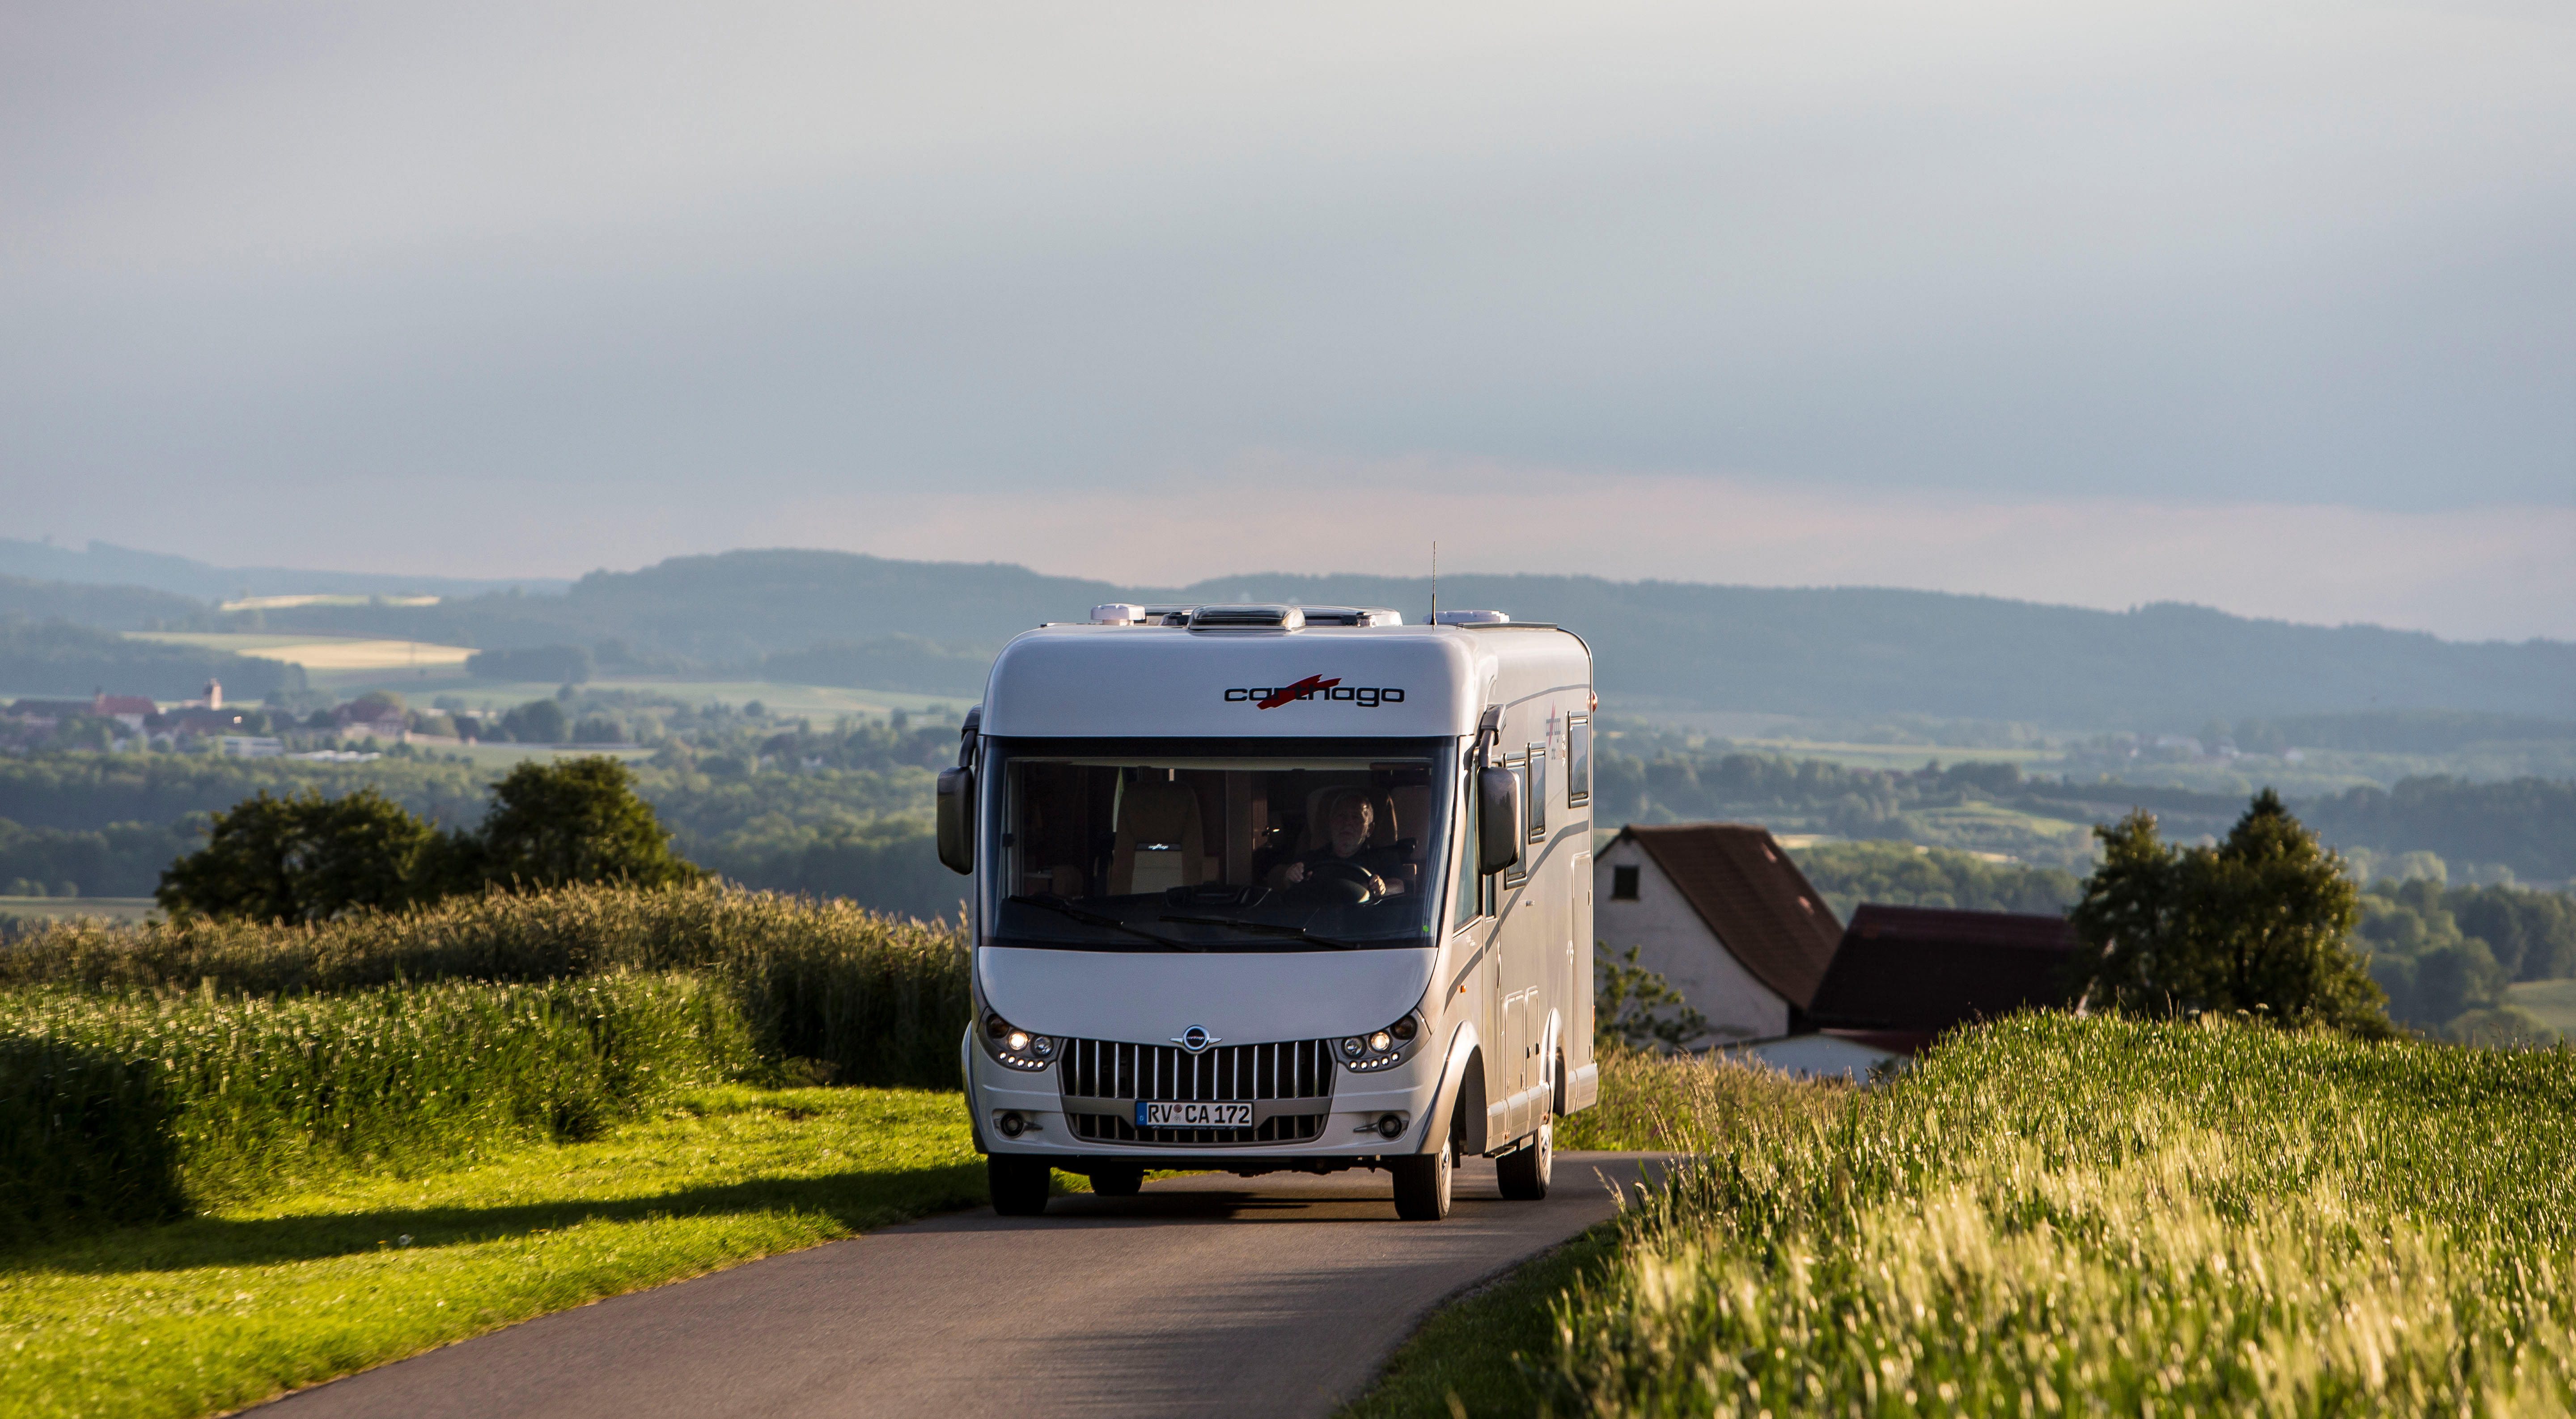 A motorhome for half a million - an investment in quality or an excess of form over content? Carthago C-Line test – main image